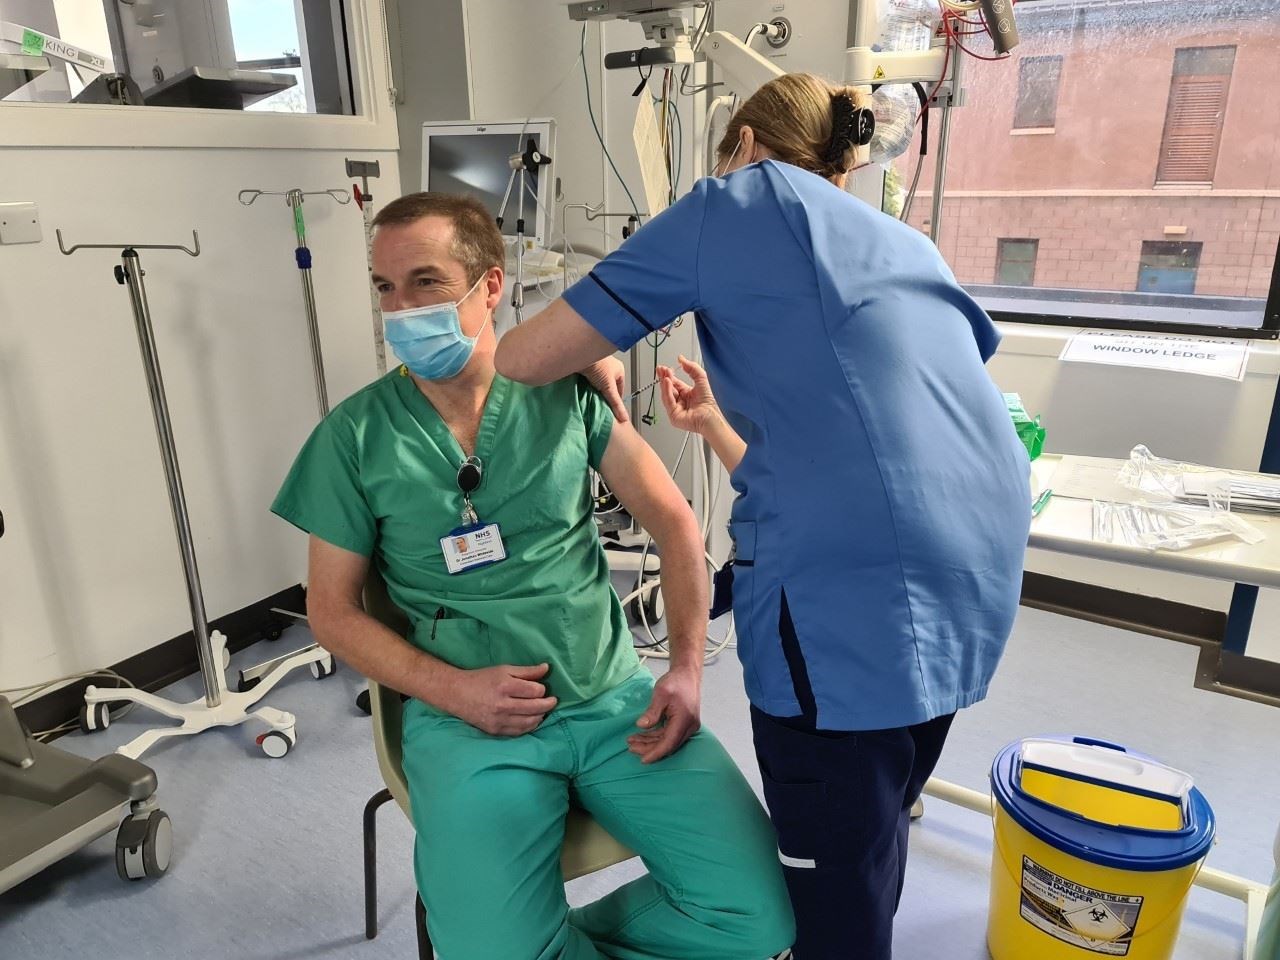 Dr Jonathan Whiteside, Clinical Lead for Critical Care with NHS Highland, was the first person to be vaccinated within the NHS Highland area in December 2020. Maureen Sutherland did the honours.